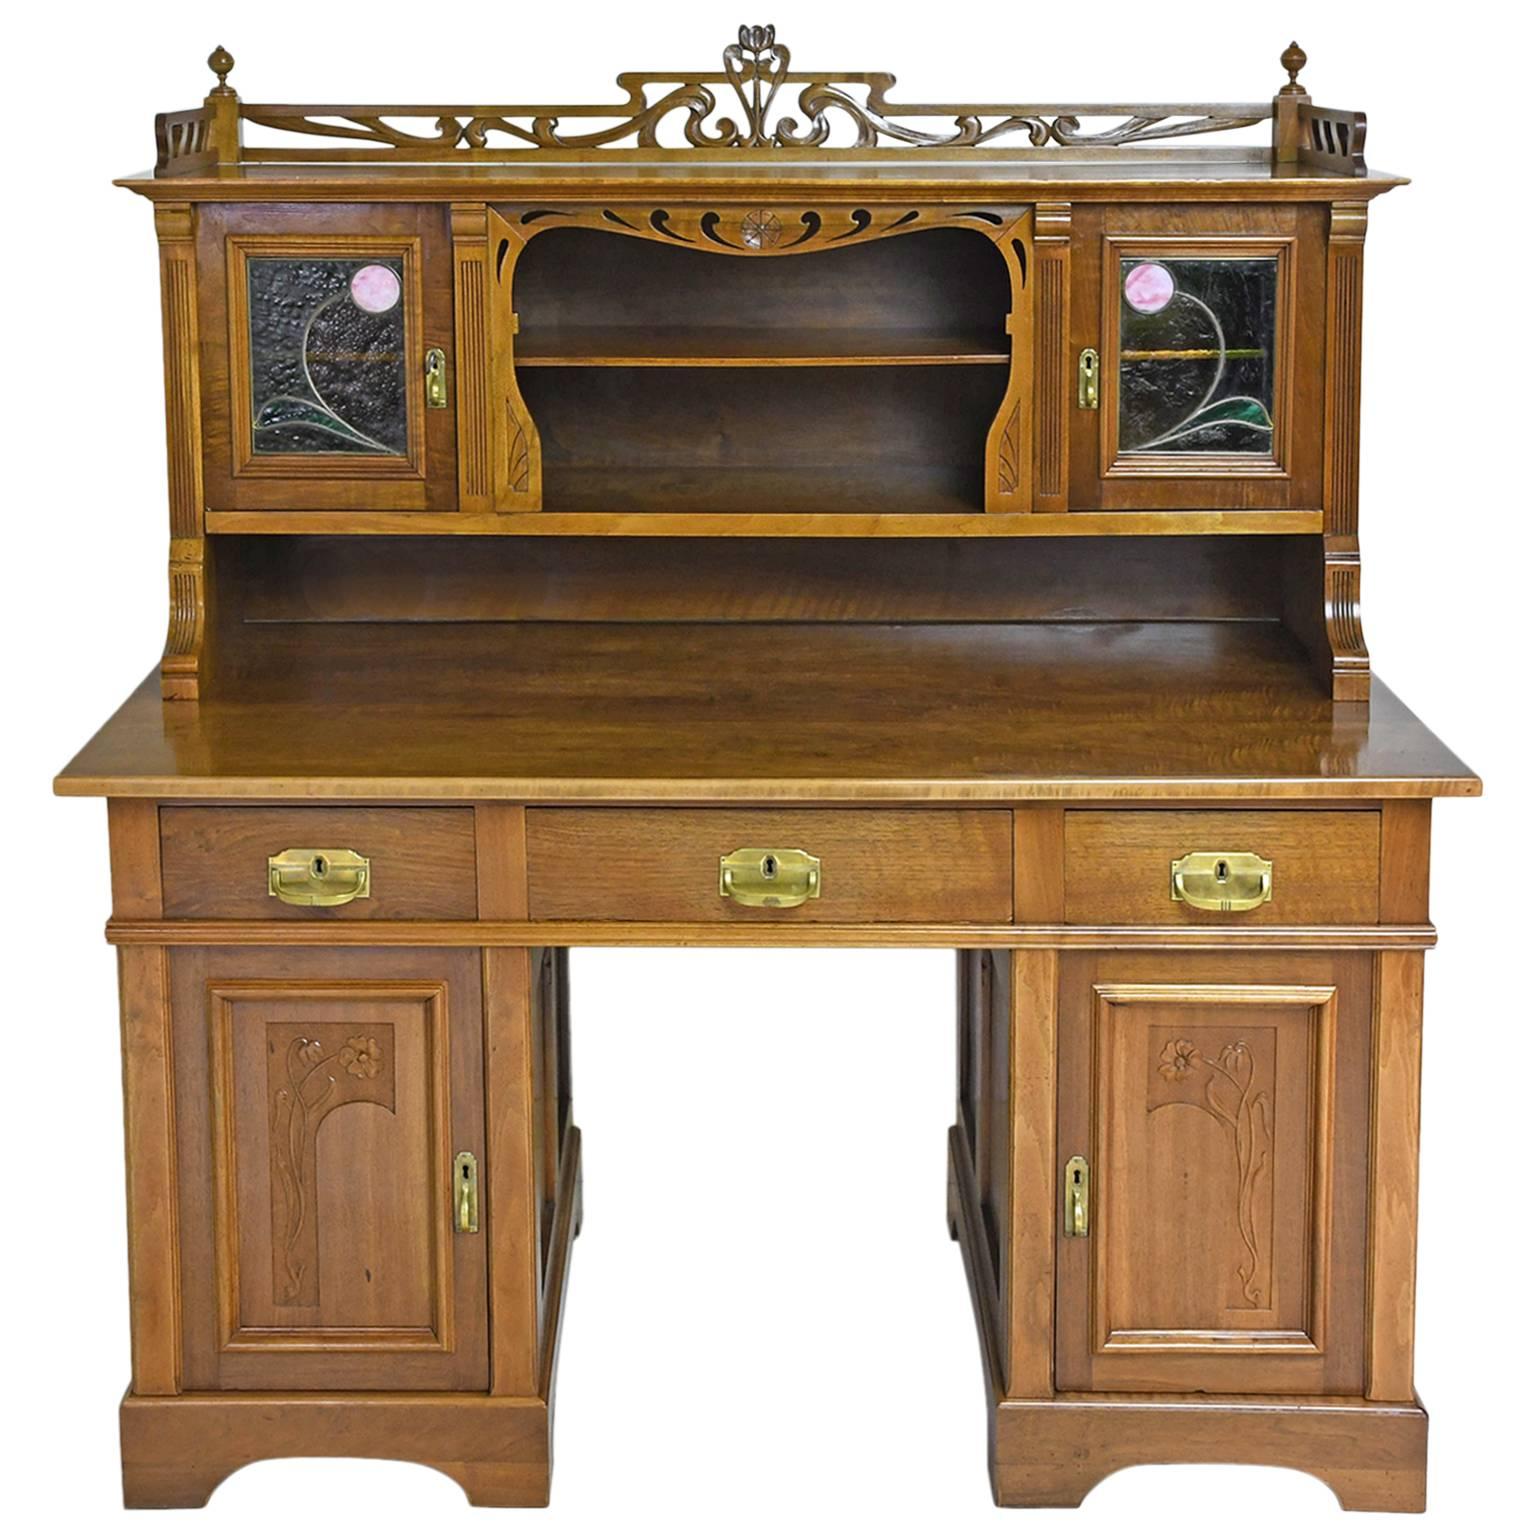 Art Nouveau Walnut Pedestal Desk with Upper Cabinet and Stained Glass, C. 1900 For Sale